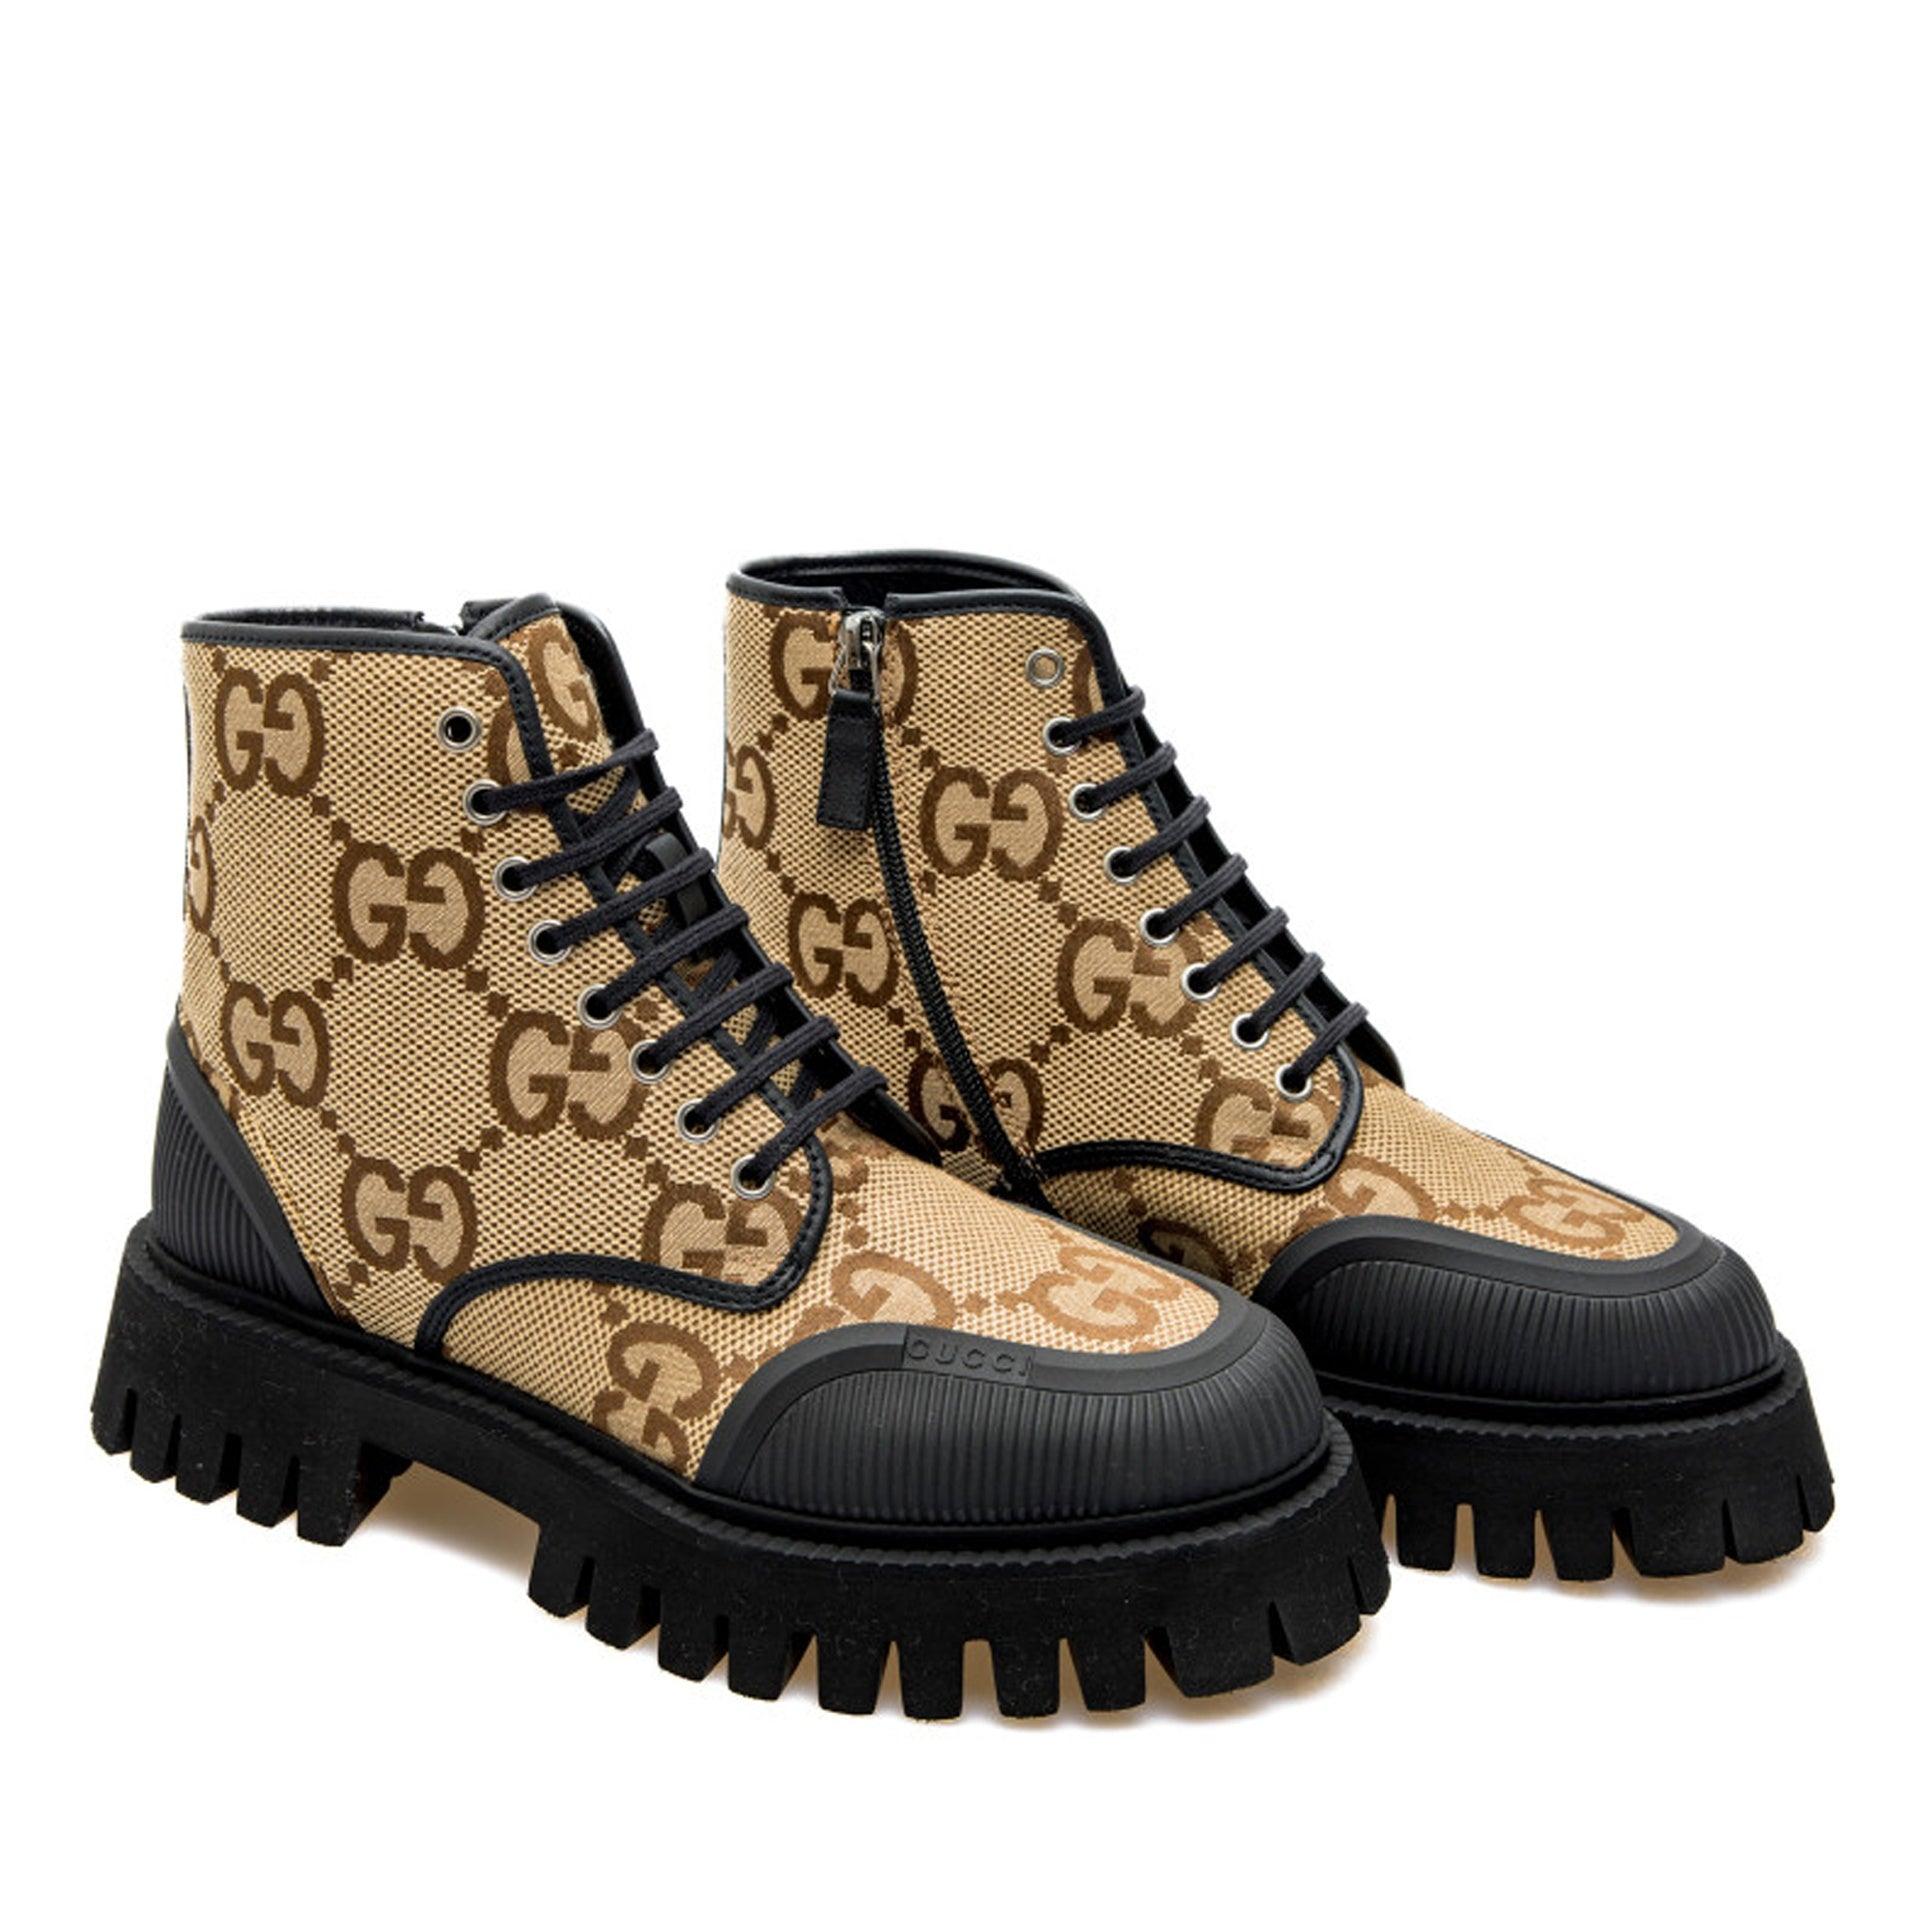 Men's maxi GG lace-up boot in camel and ebony canvas